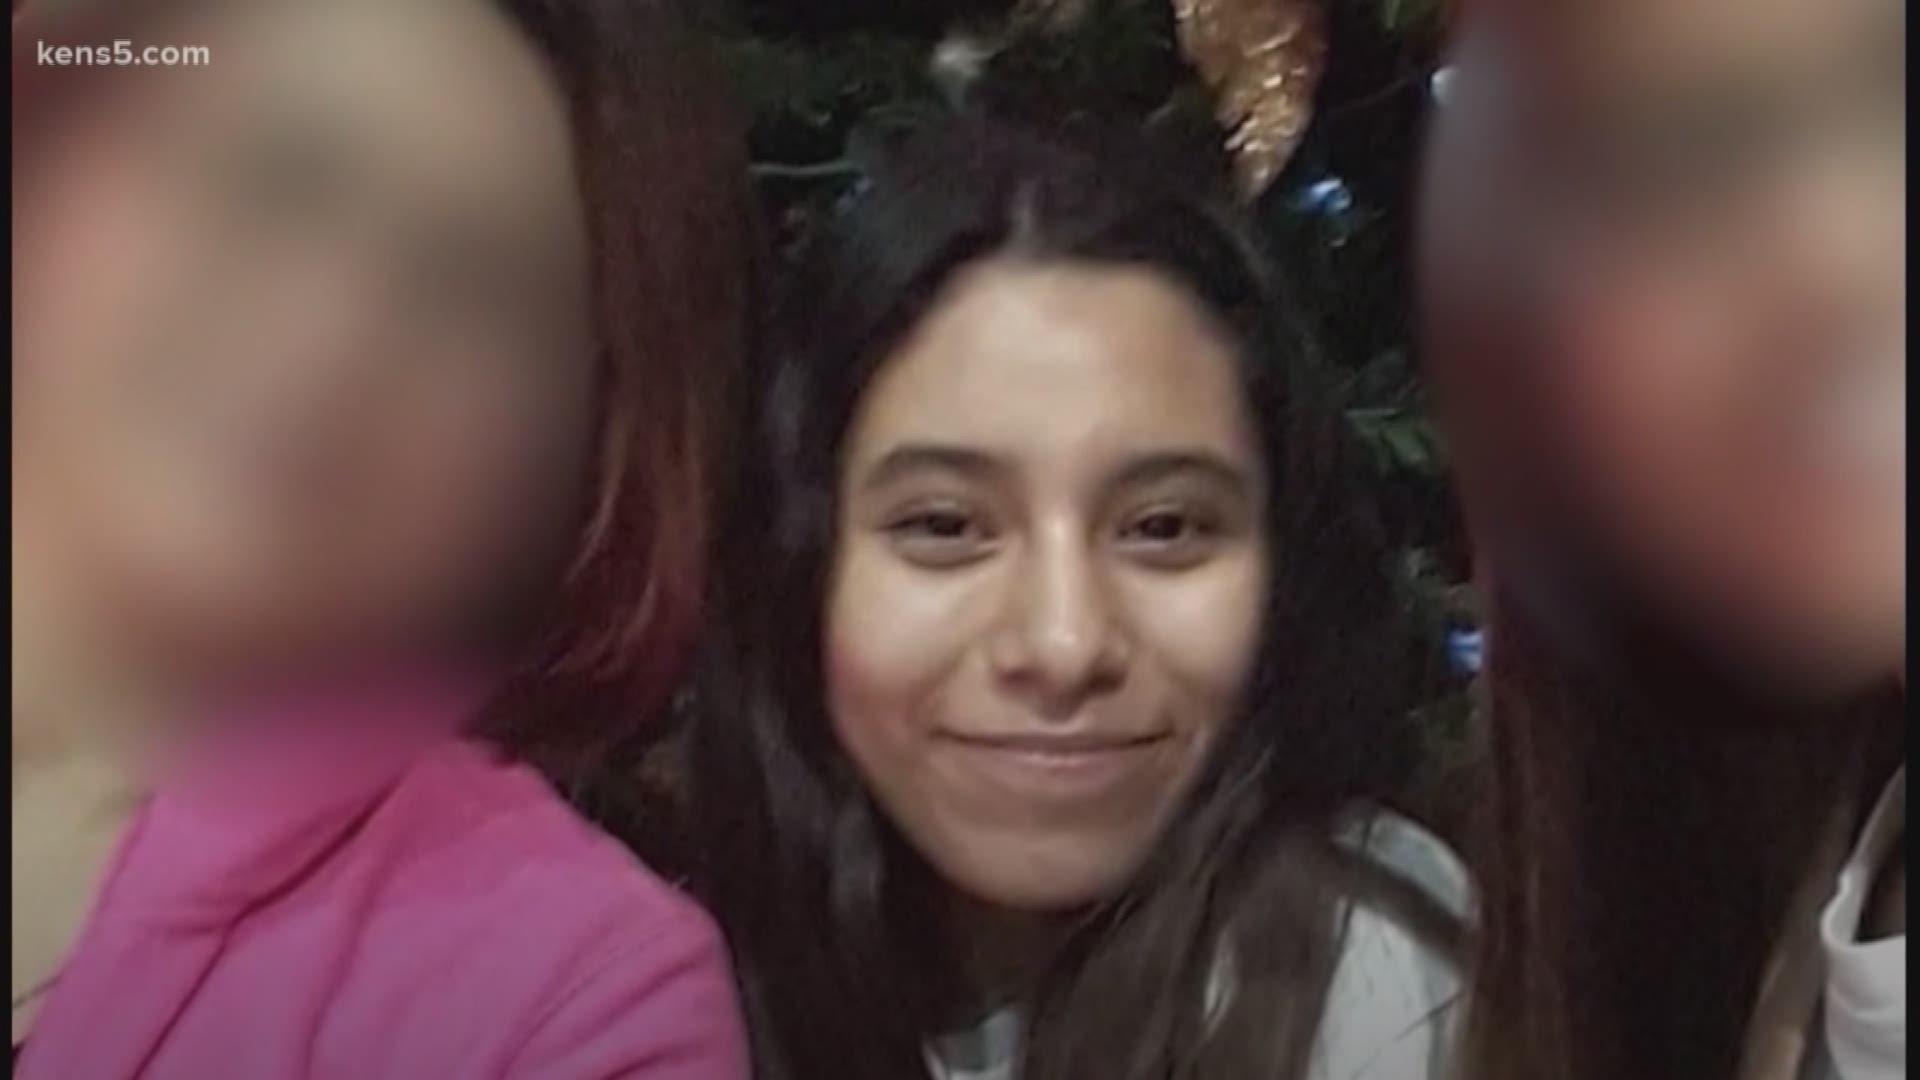 The Bexar County Sheriff's Office is joining the search for a  missing Hondo teen who hasn't been seen in more than a month.